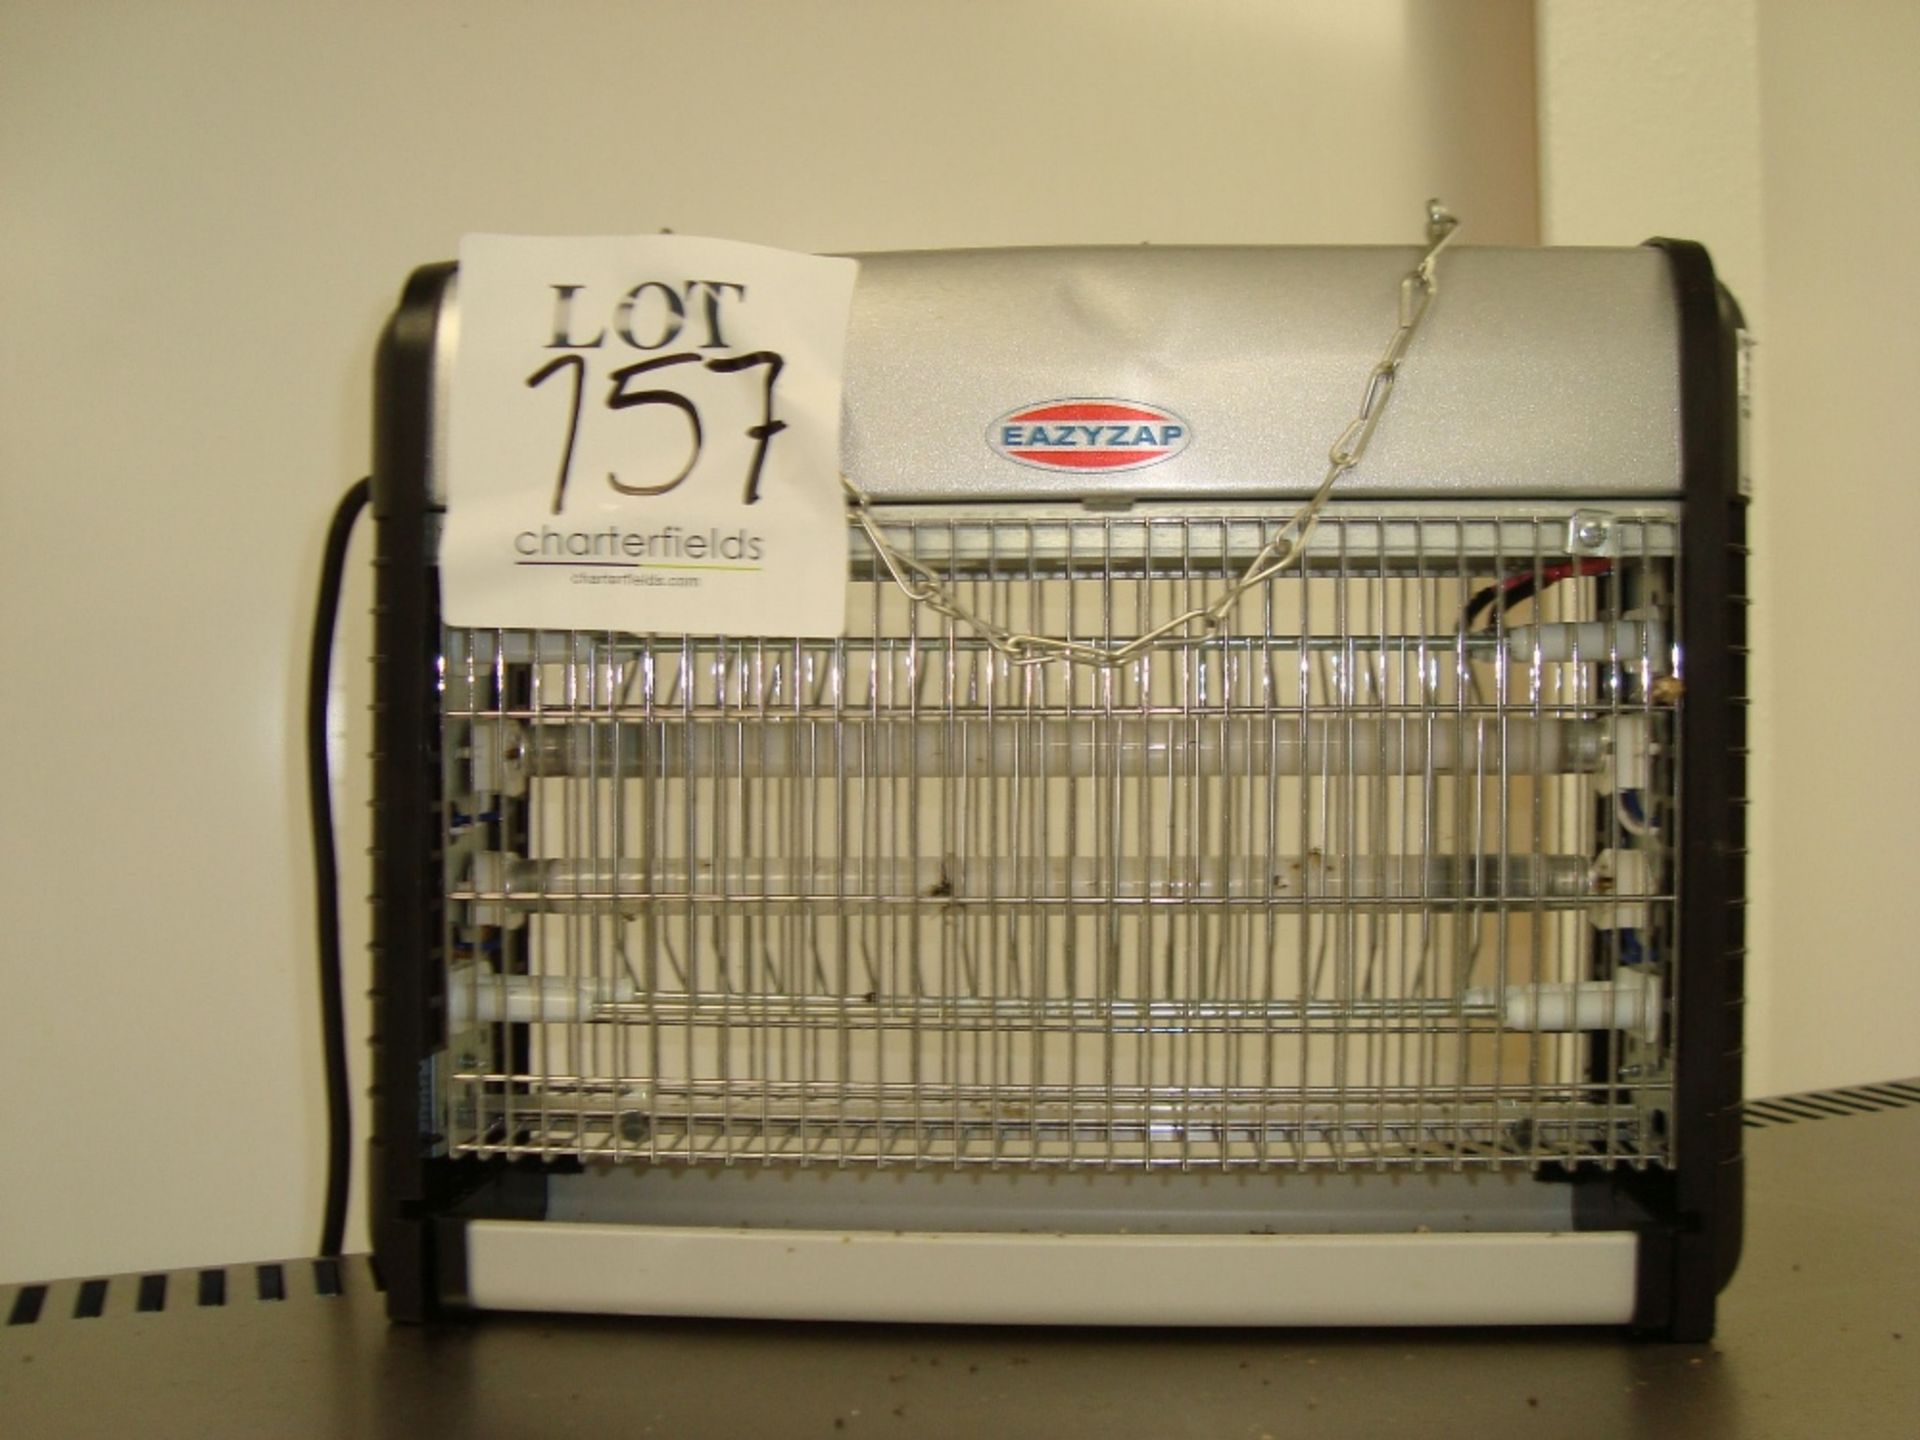 An Easyzap electric insect killer